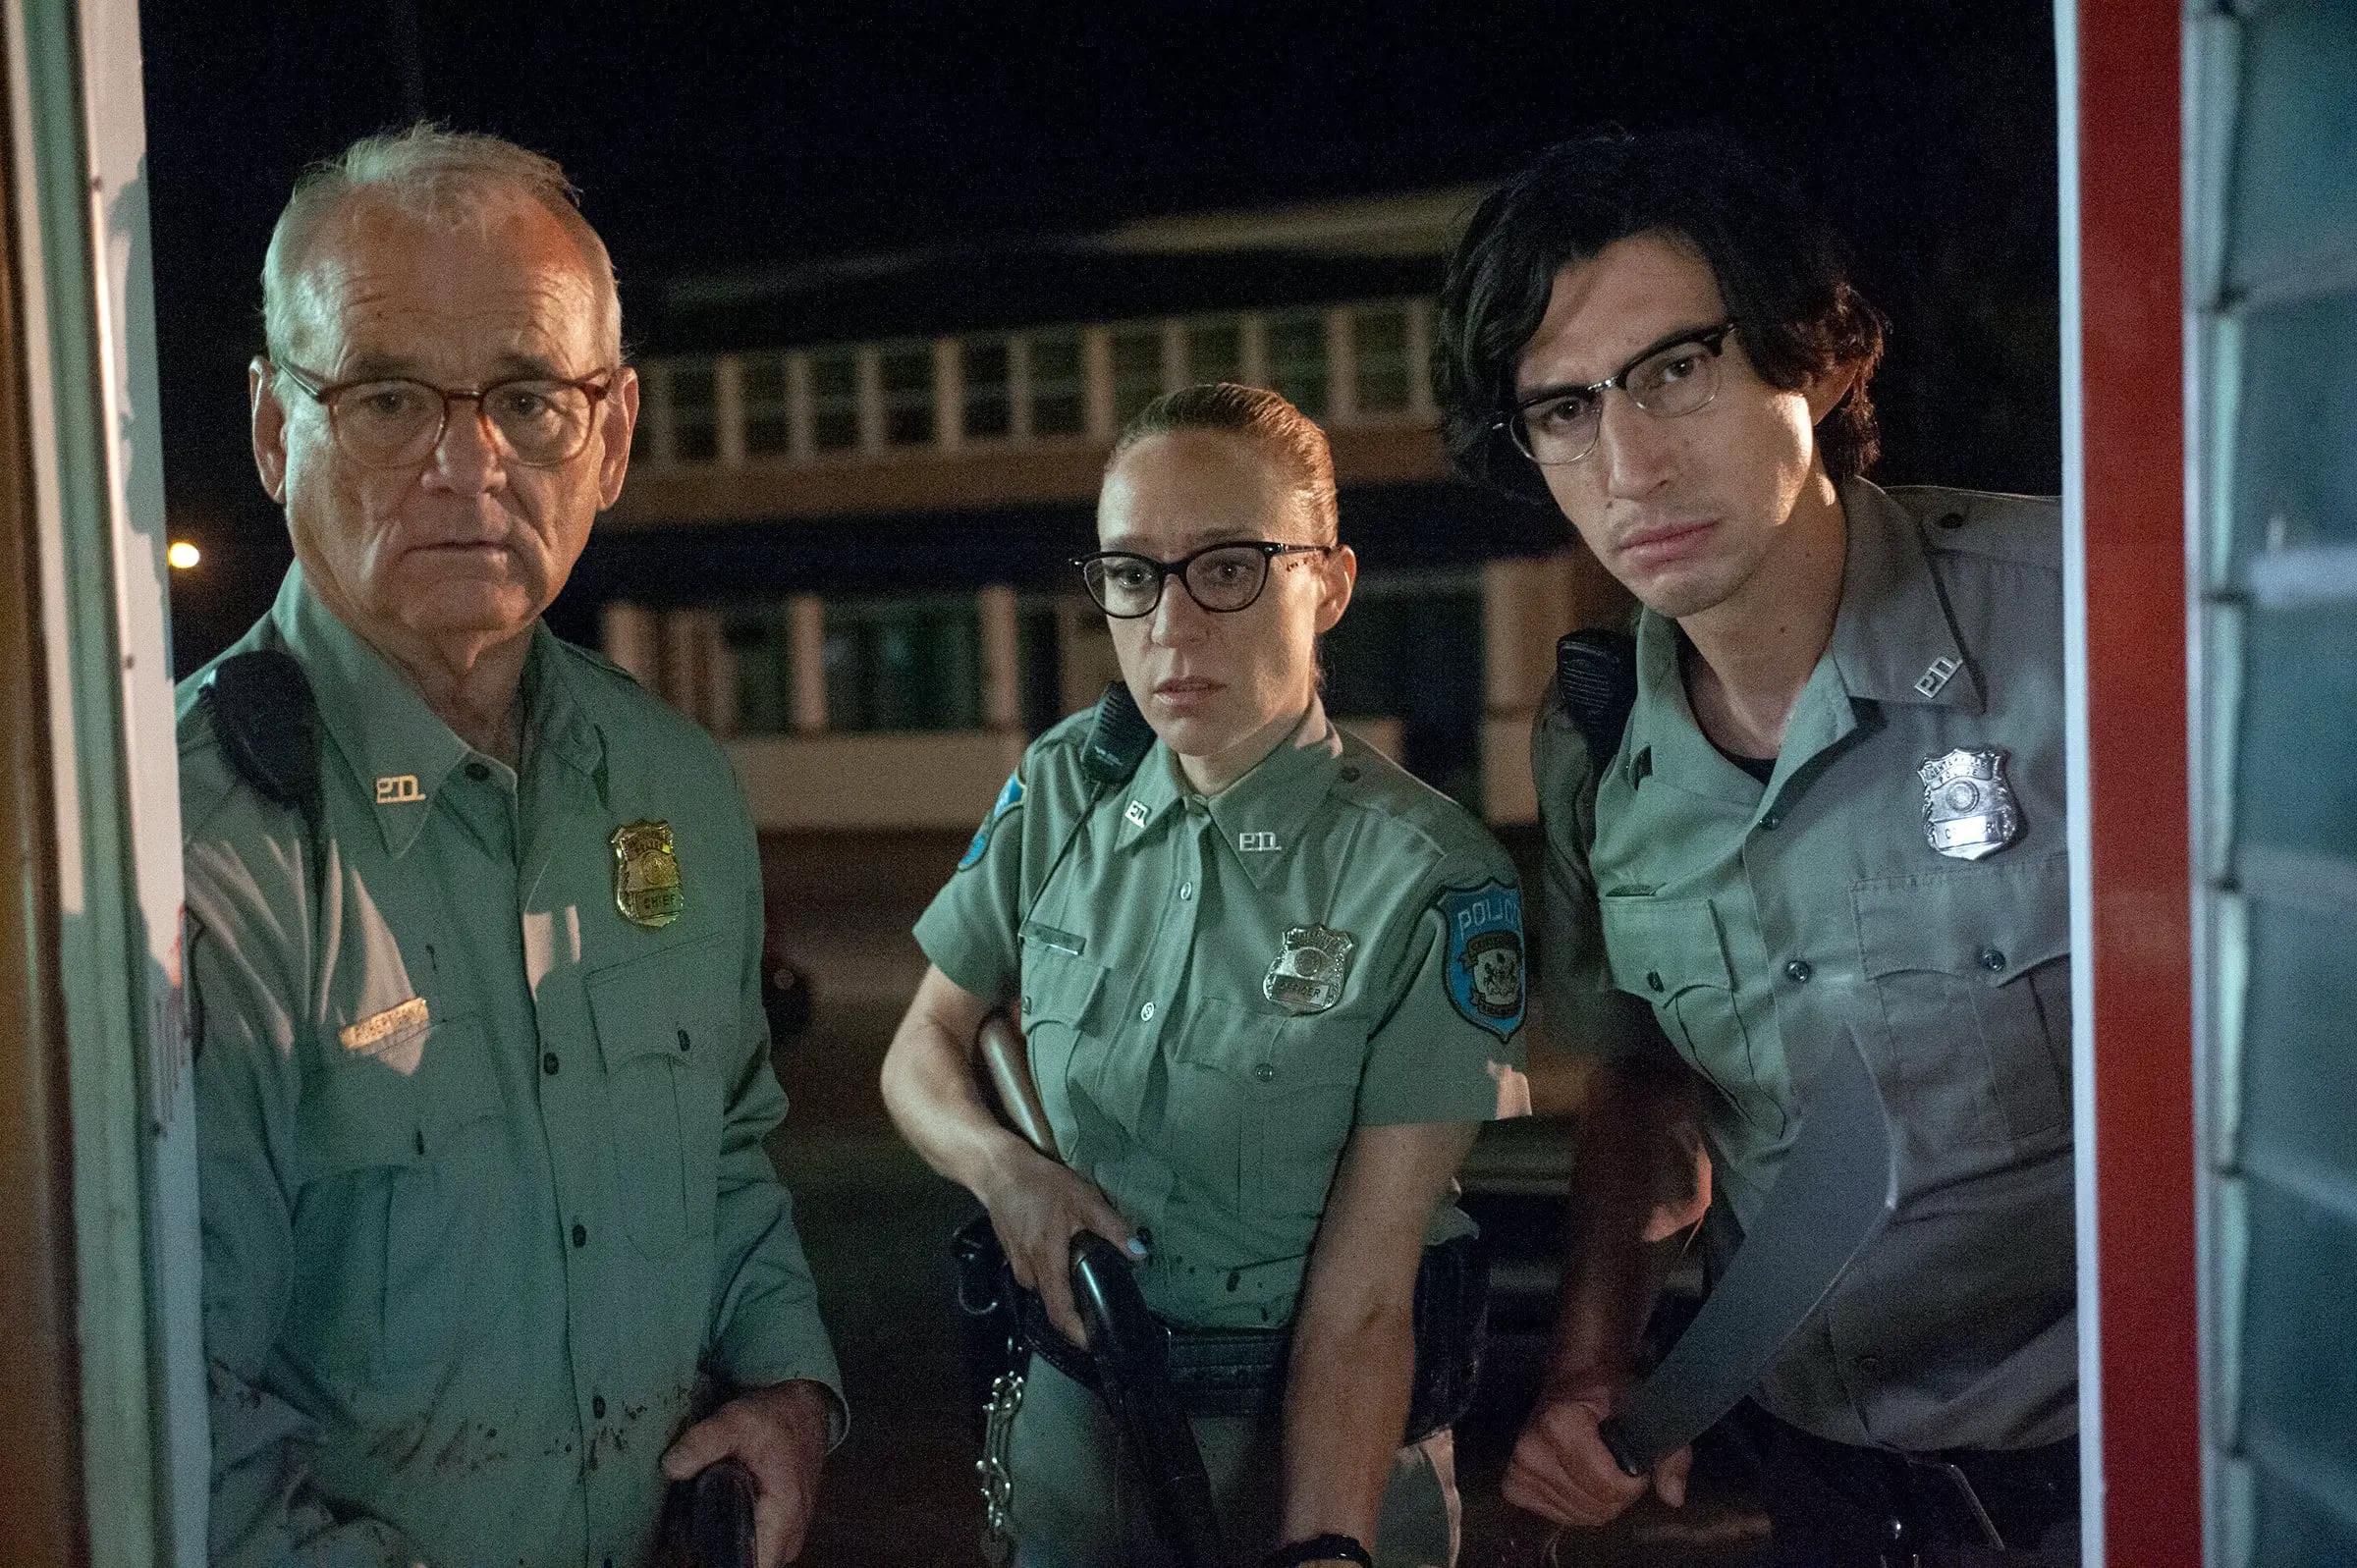 (L to R) Bill Murray as "Officer Cliff Robertson", Chloë Sevigny as "Officer Minerva Morrison" and Adam Driver as "Officer Ronald Peterson" in writer/director Jim Jarmusch's THE DEAD DON'T DIE